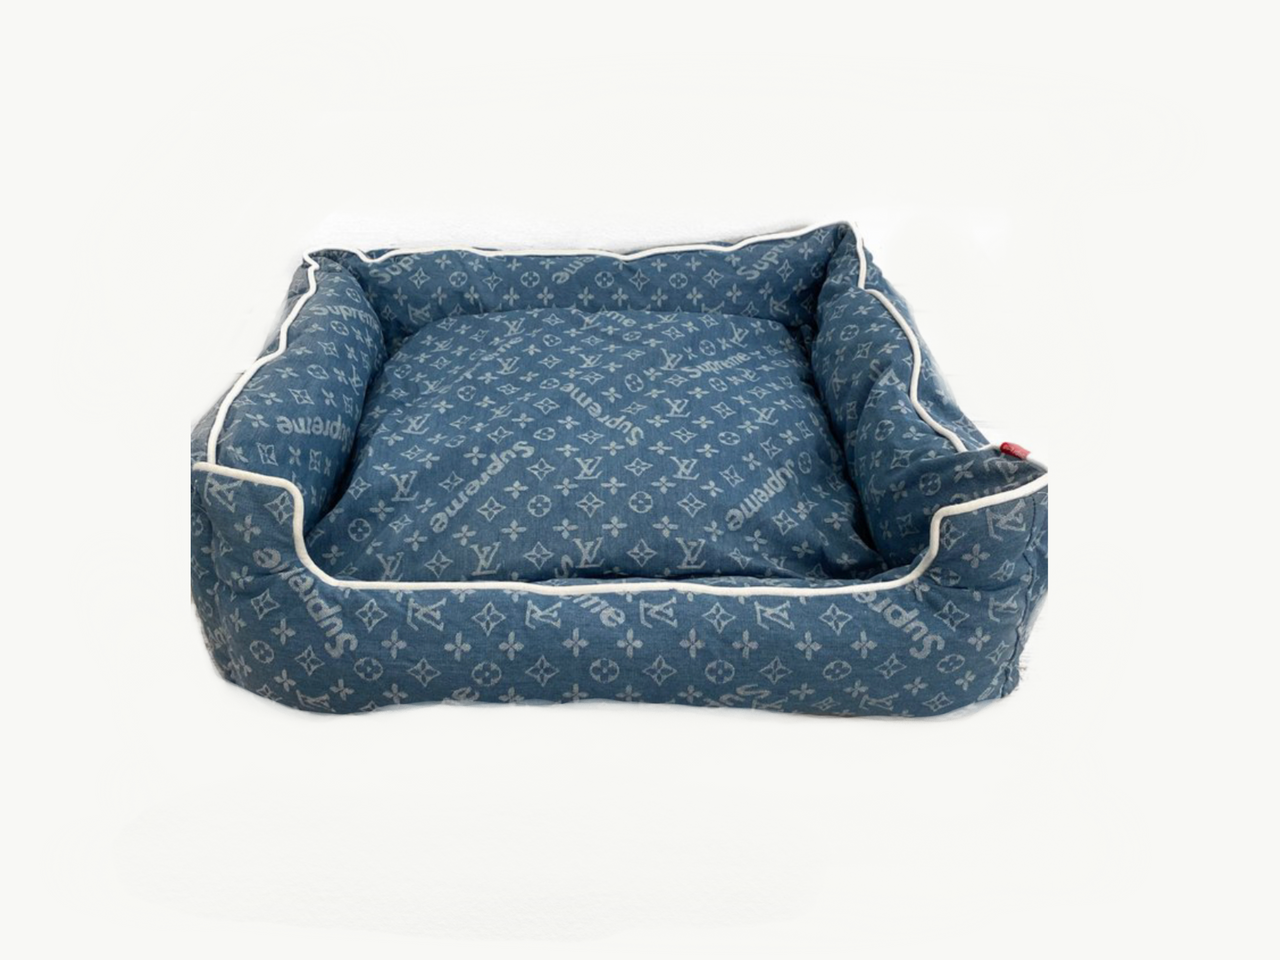 Classic Brown Chewy Vuiton Dog Bed